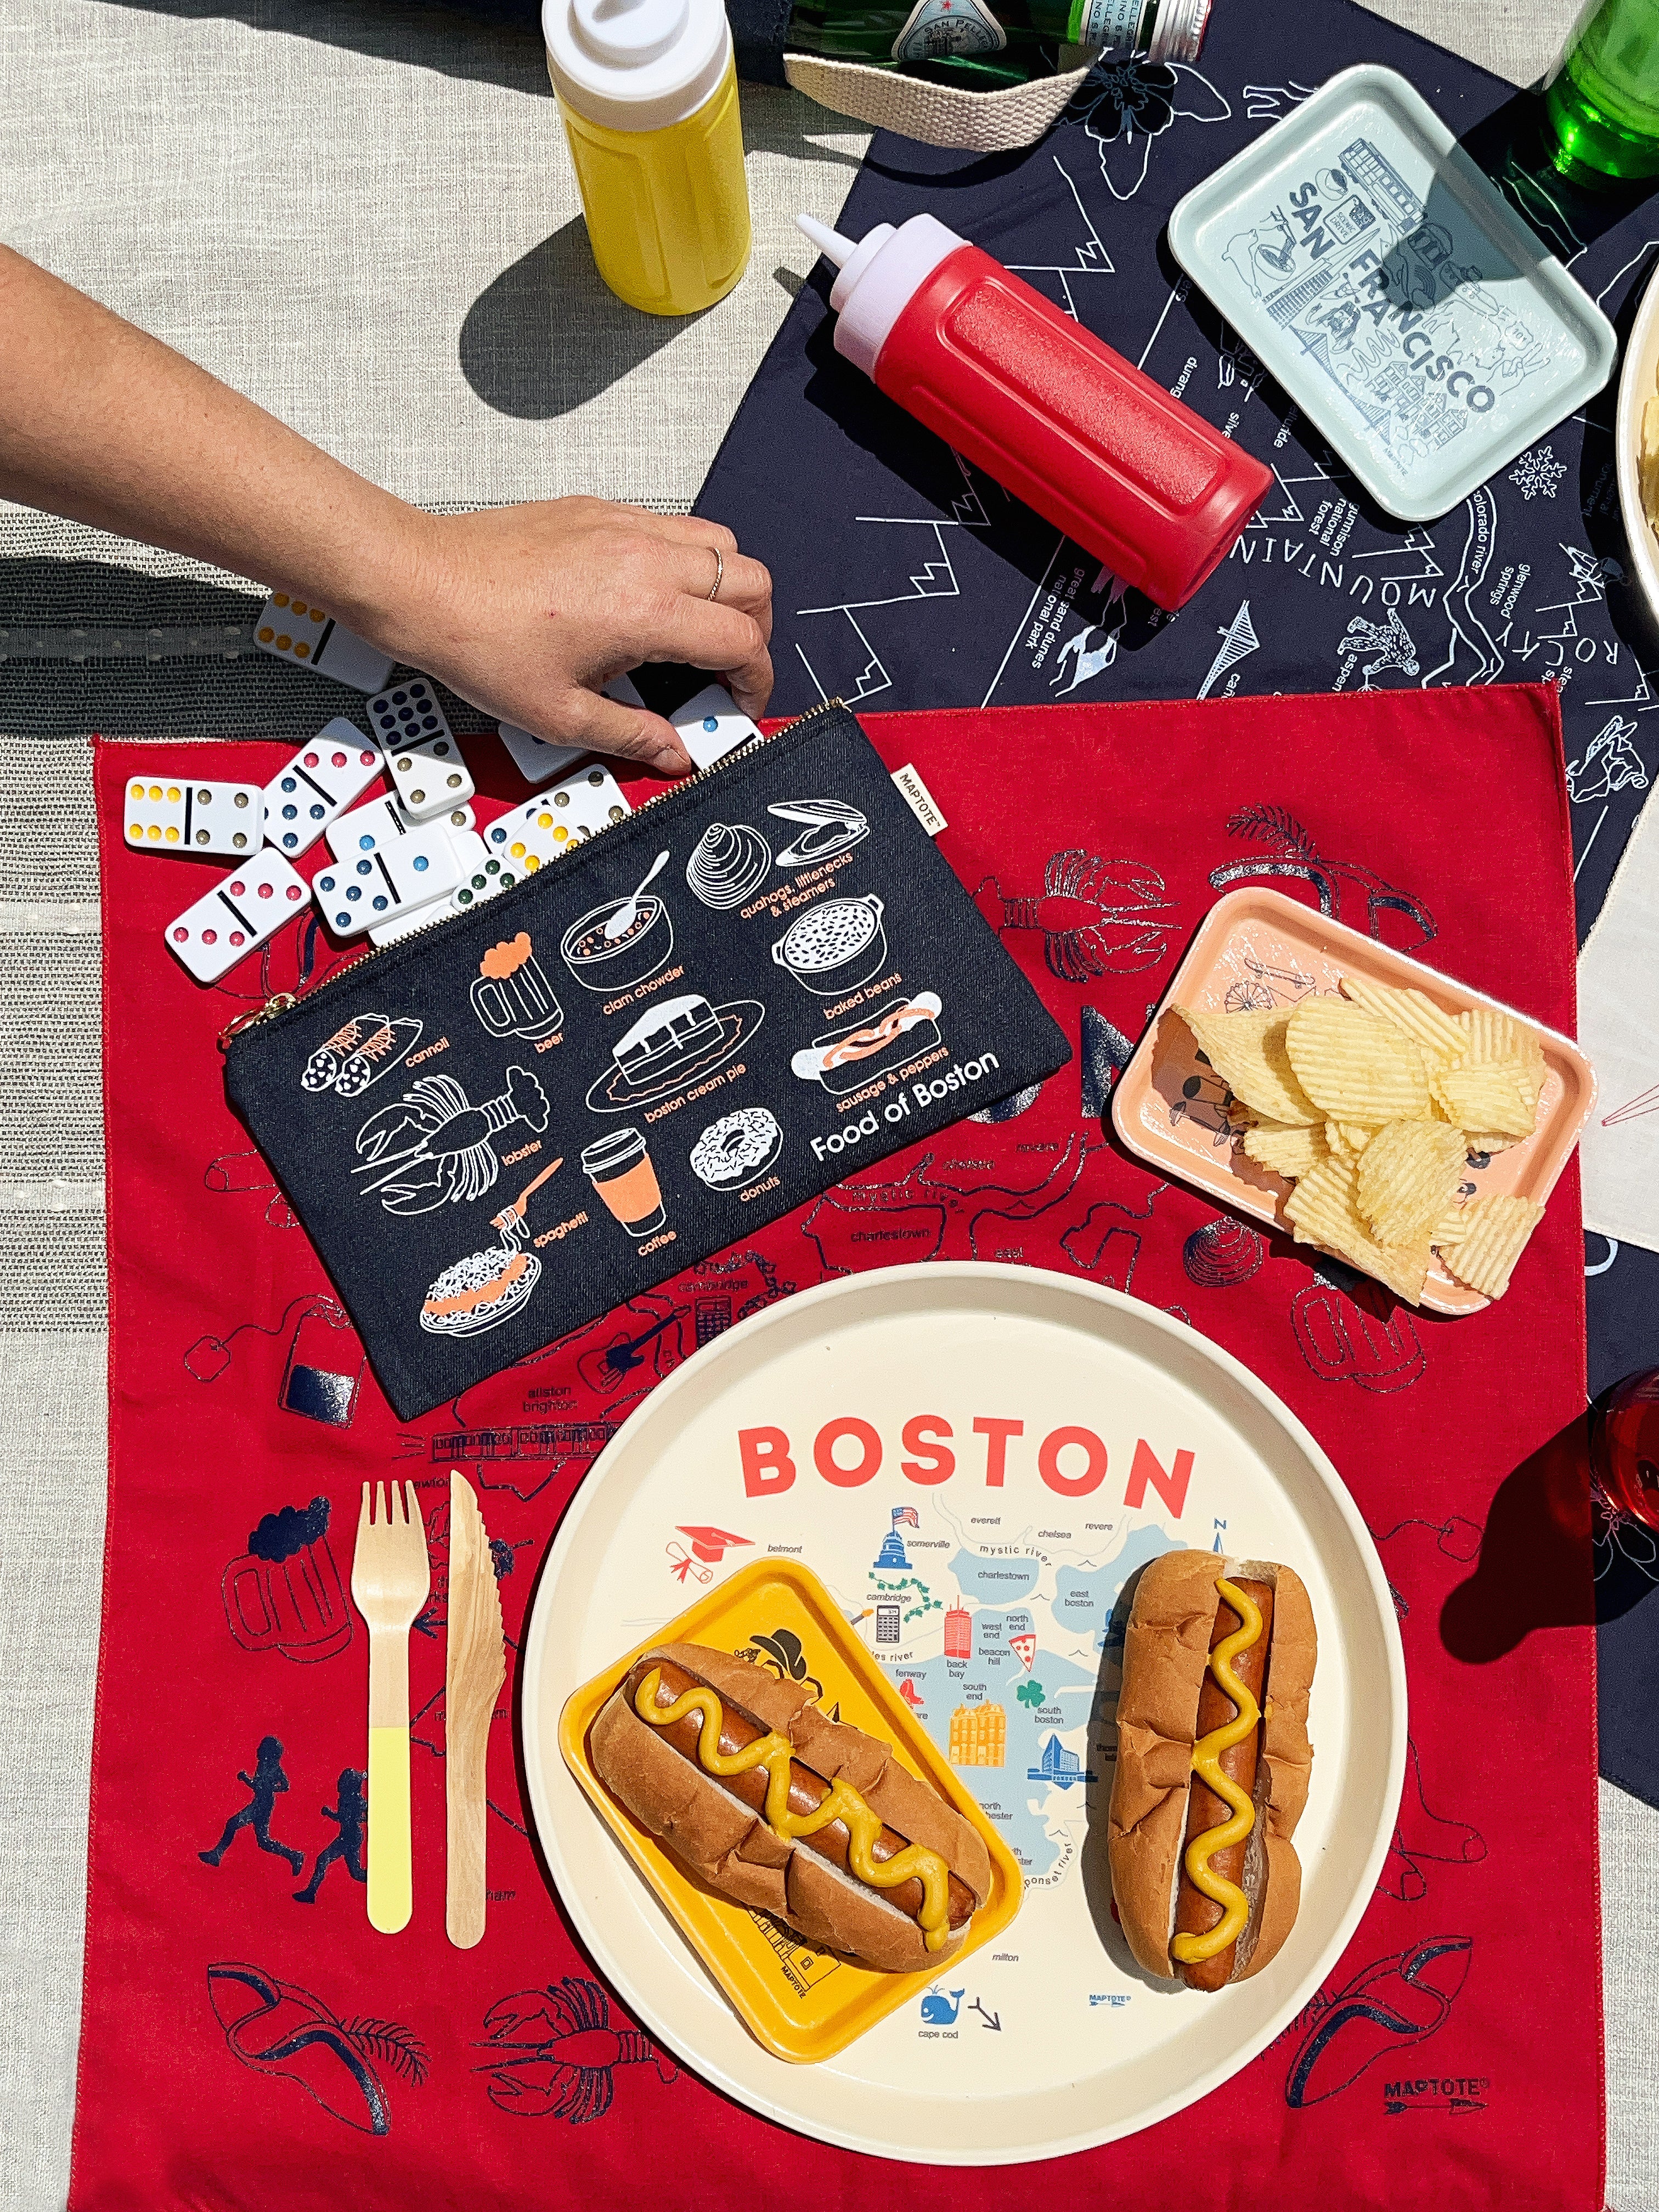 BBQ Guide: Memorial Day with Maptote! 🌭 ✨